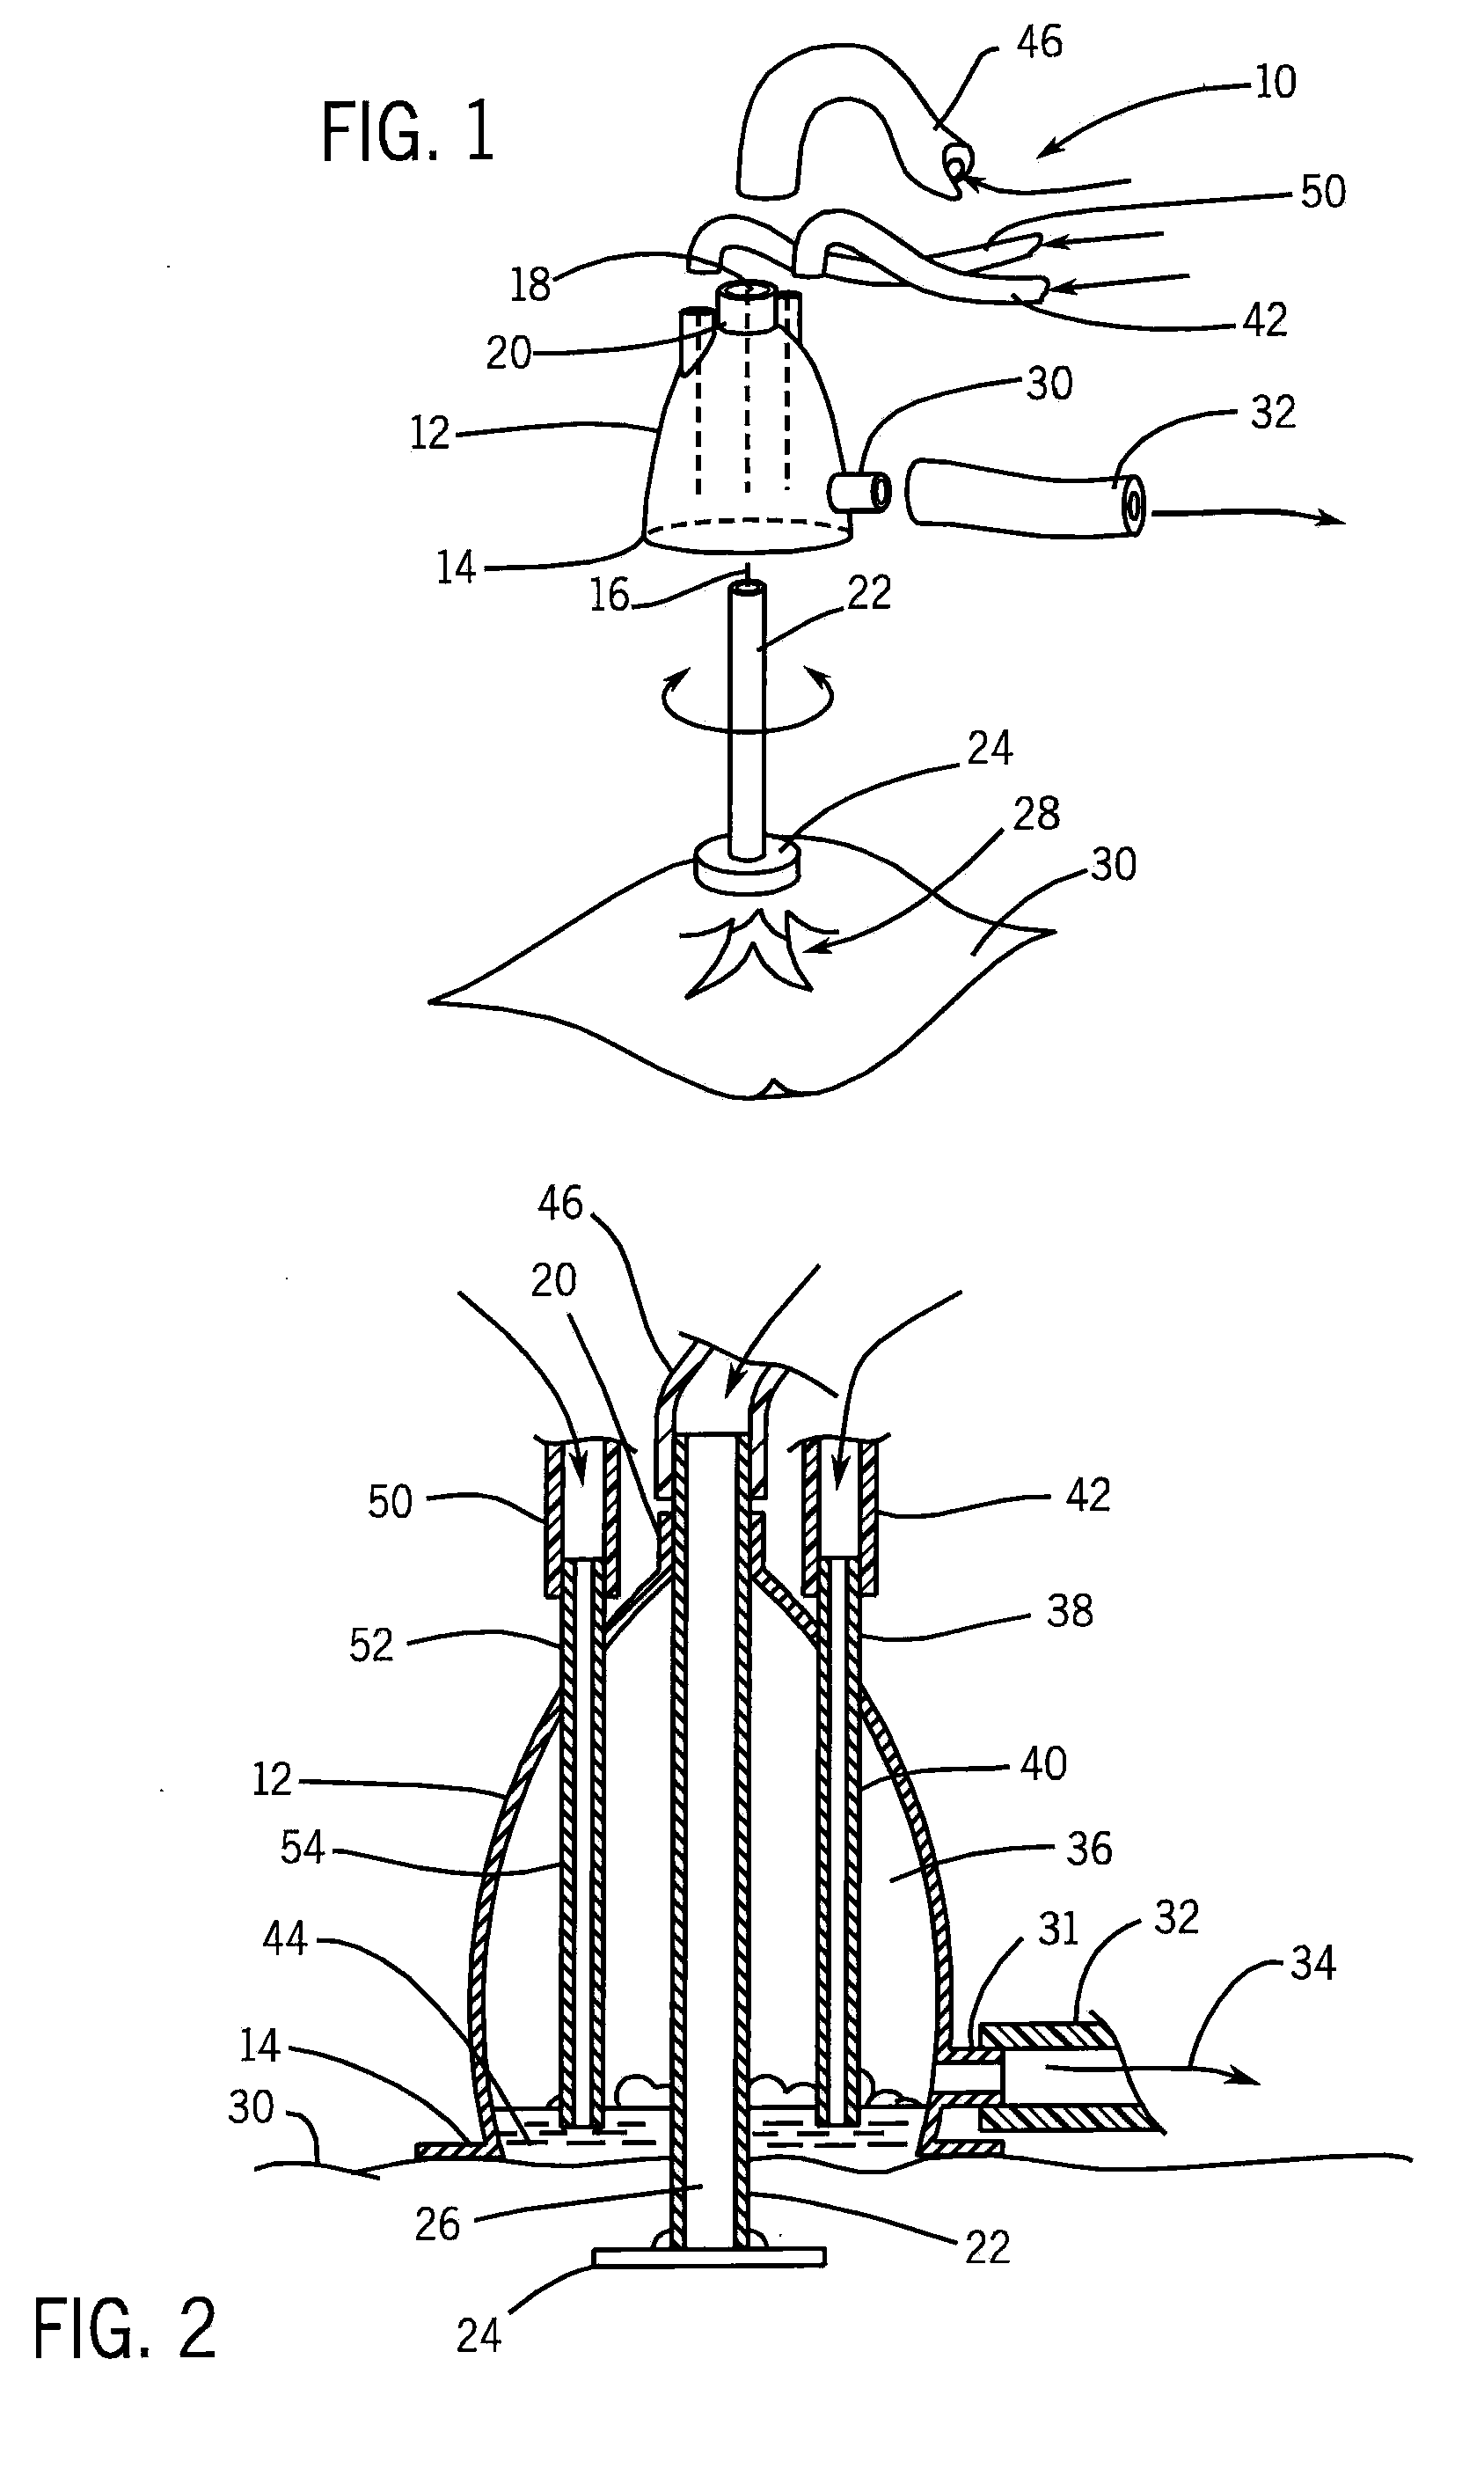 Device for Treatment of Venous Congestion